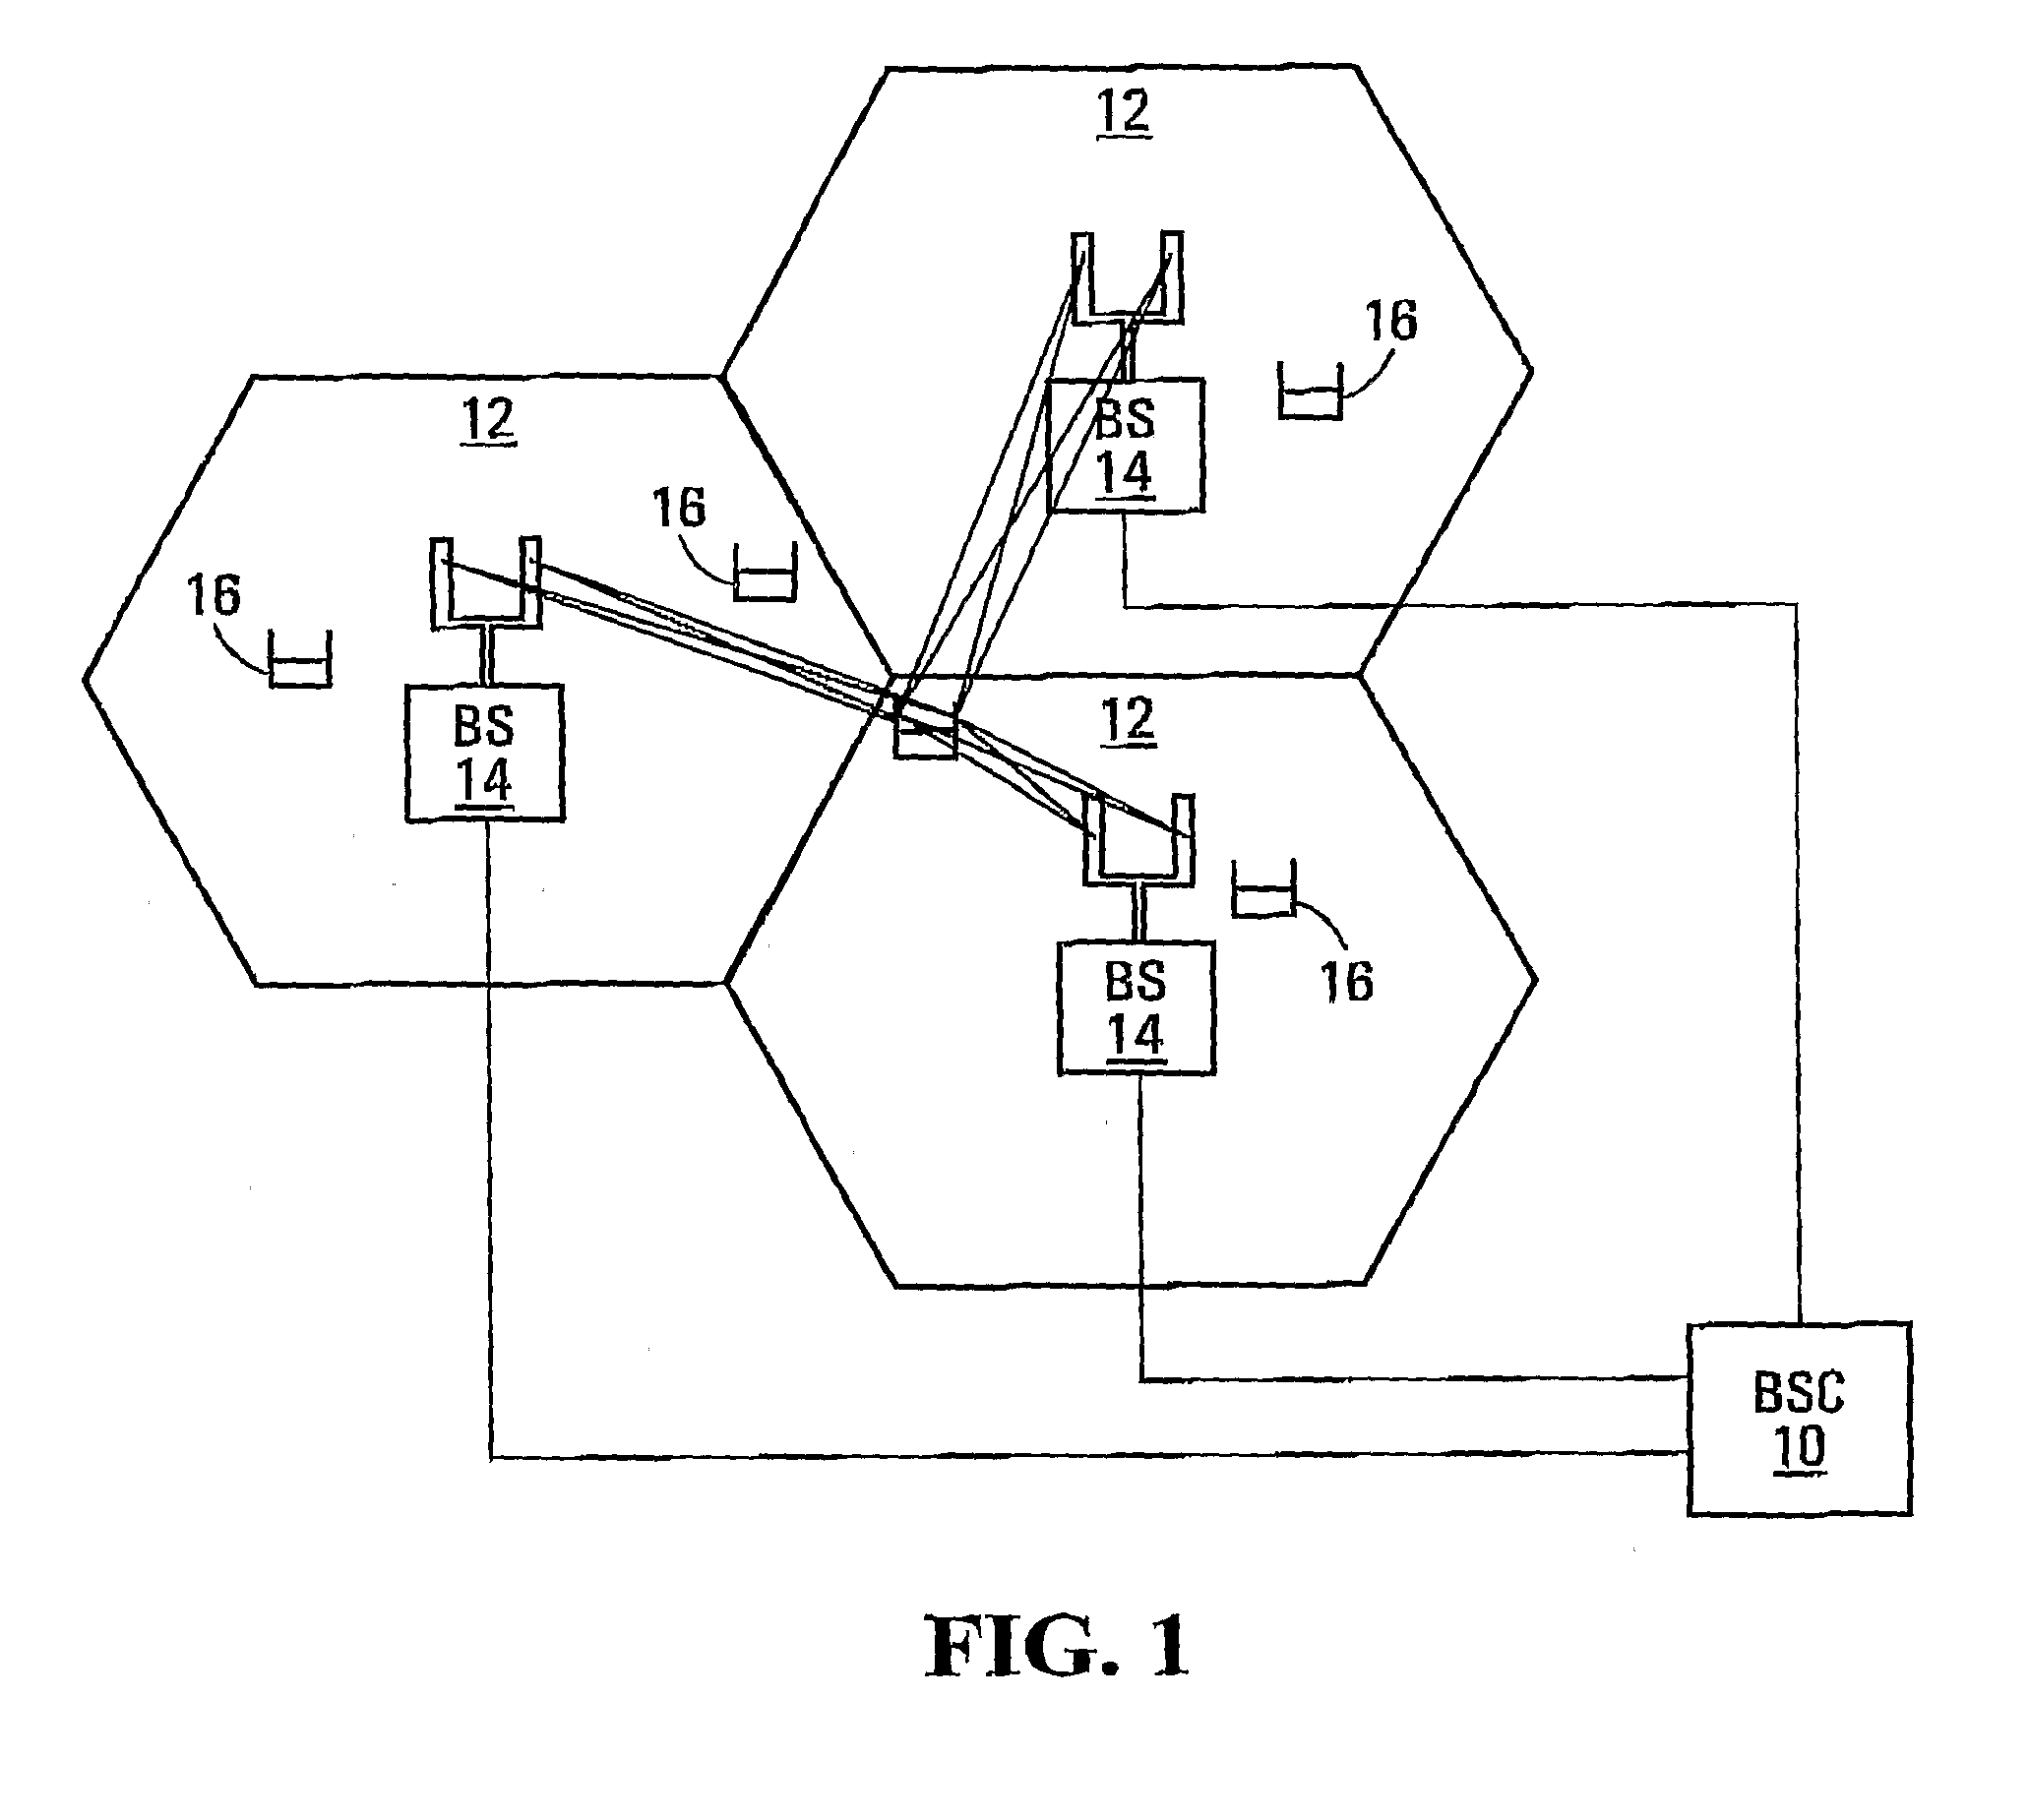 Methods and Systems for Enabling Feedback in Wireless Communication Networks